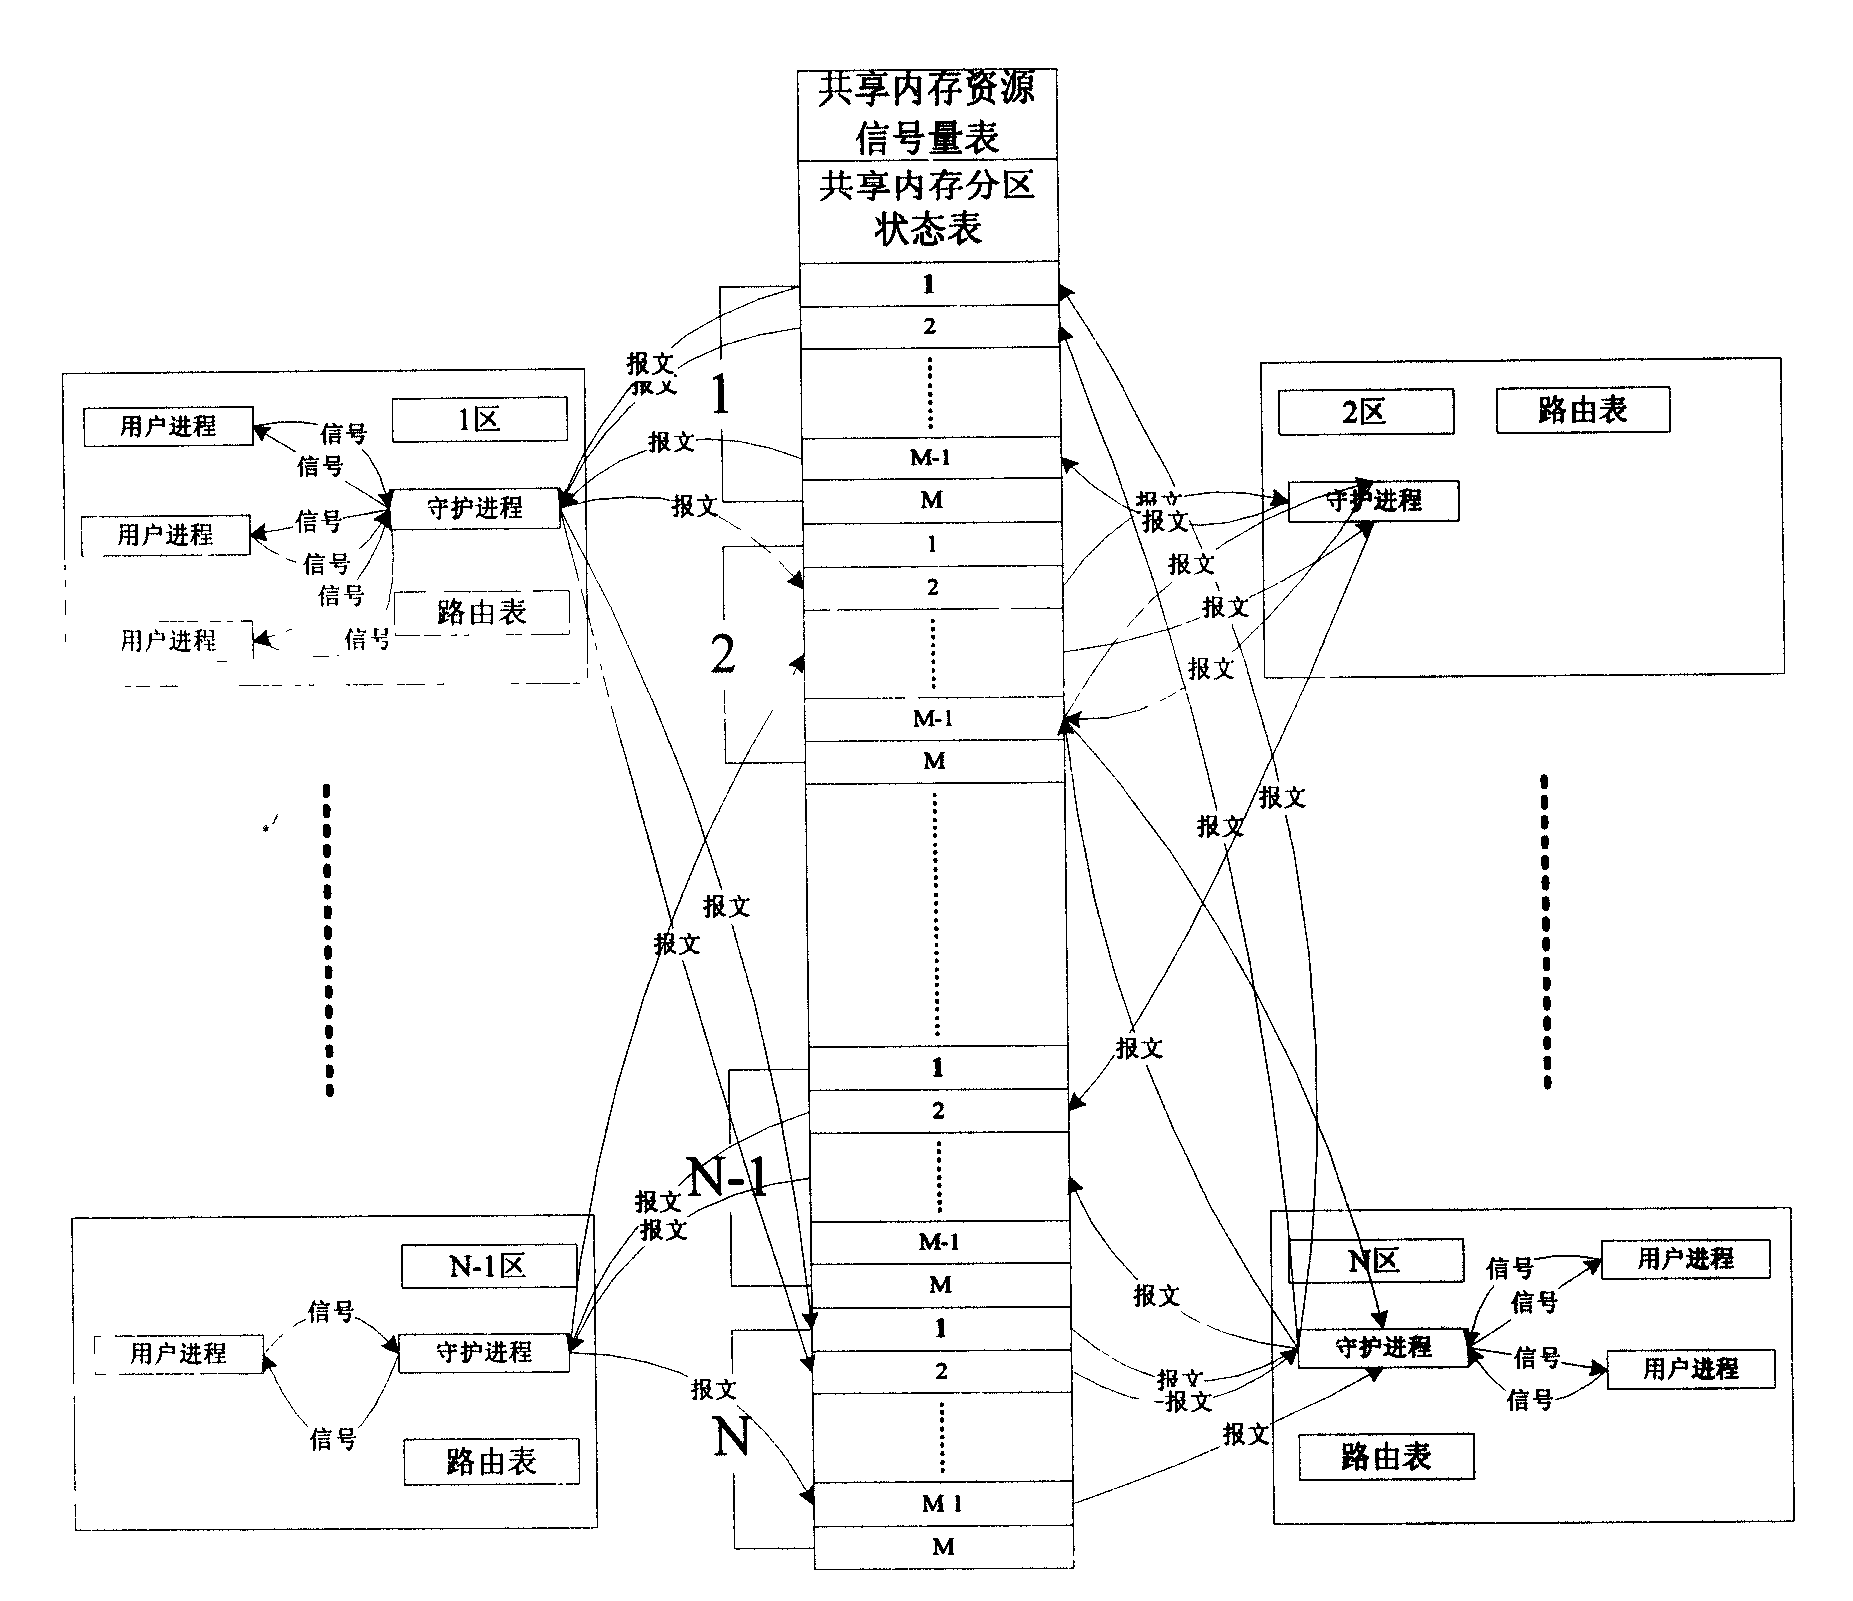 Novel computer system structure and device with networking inside